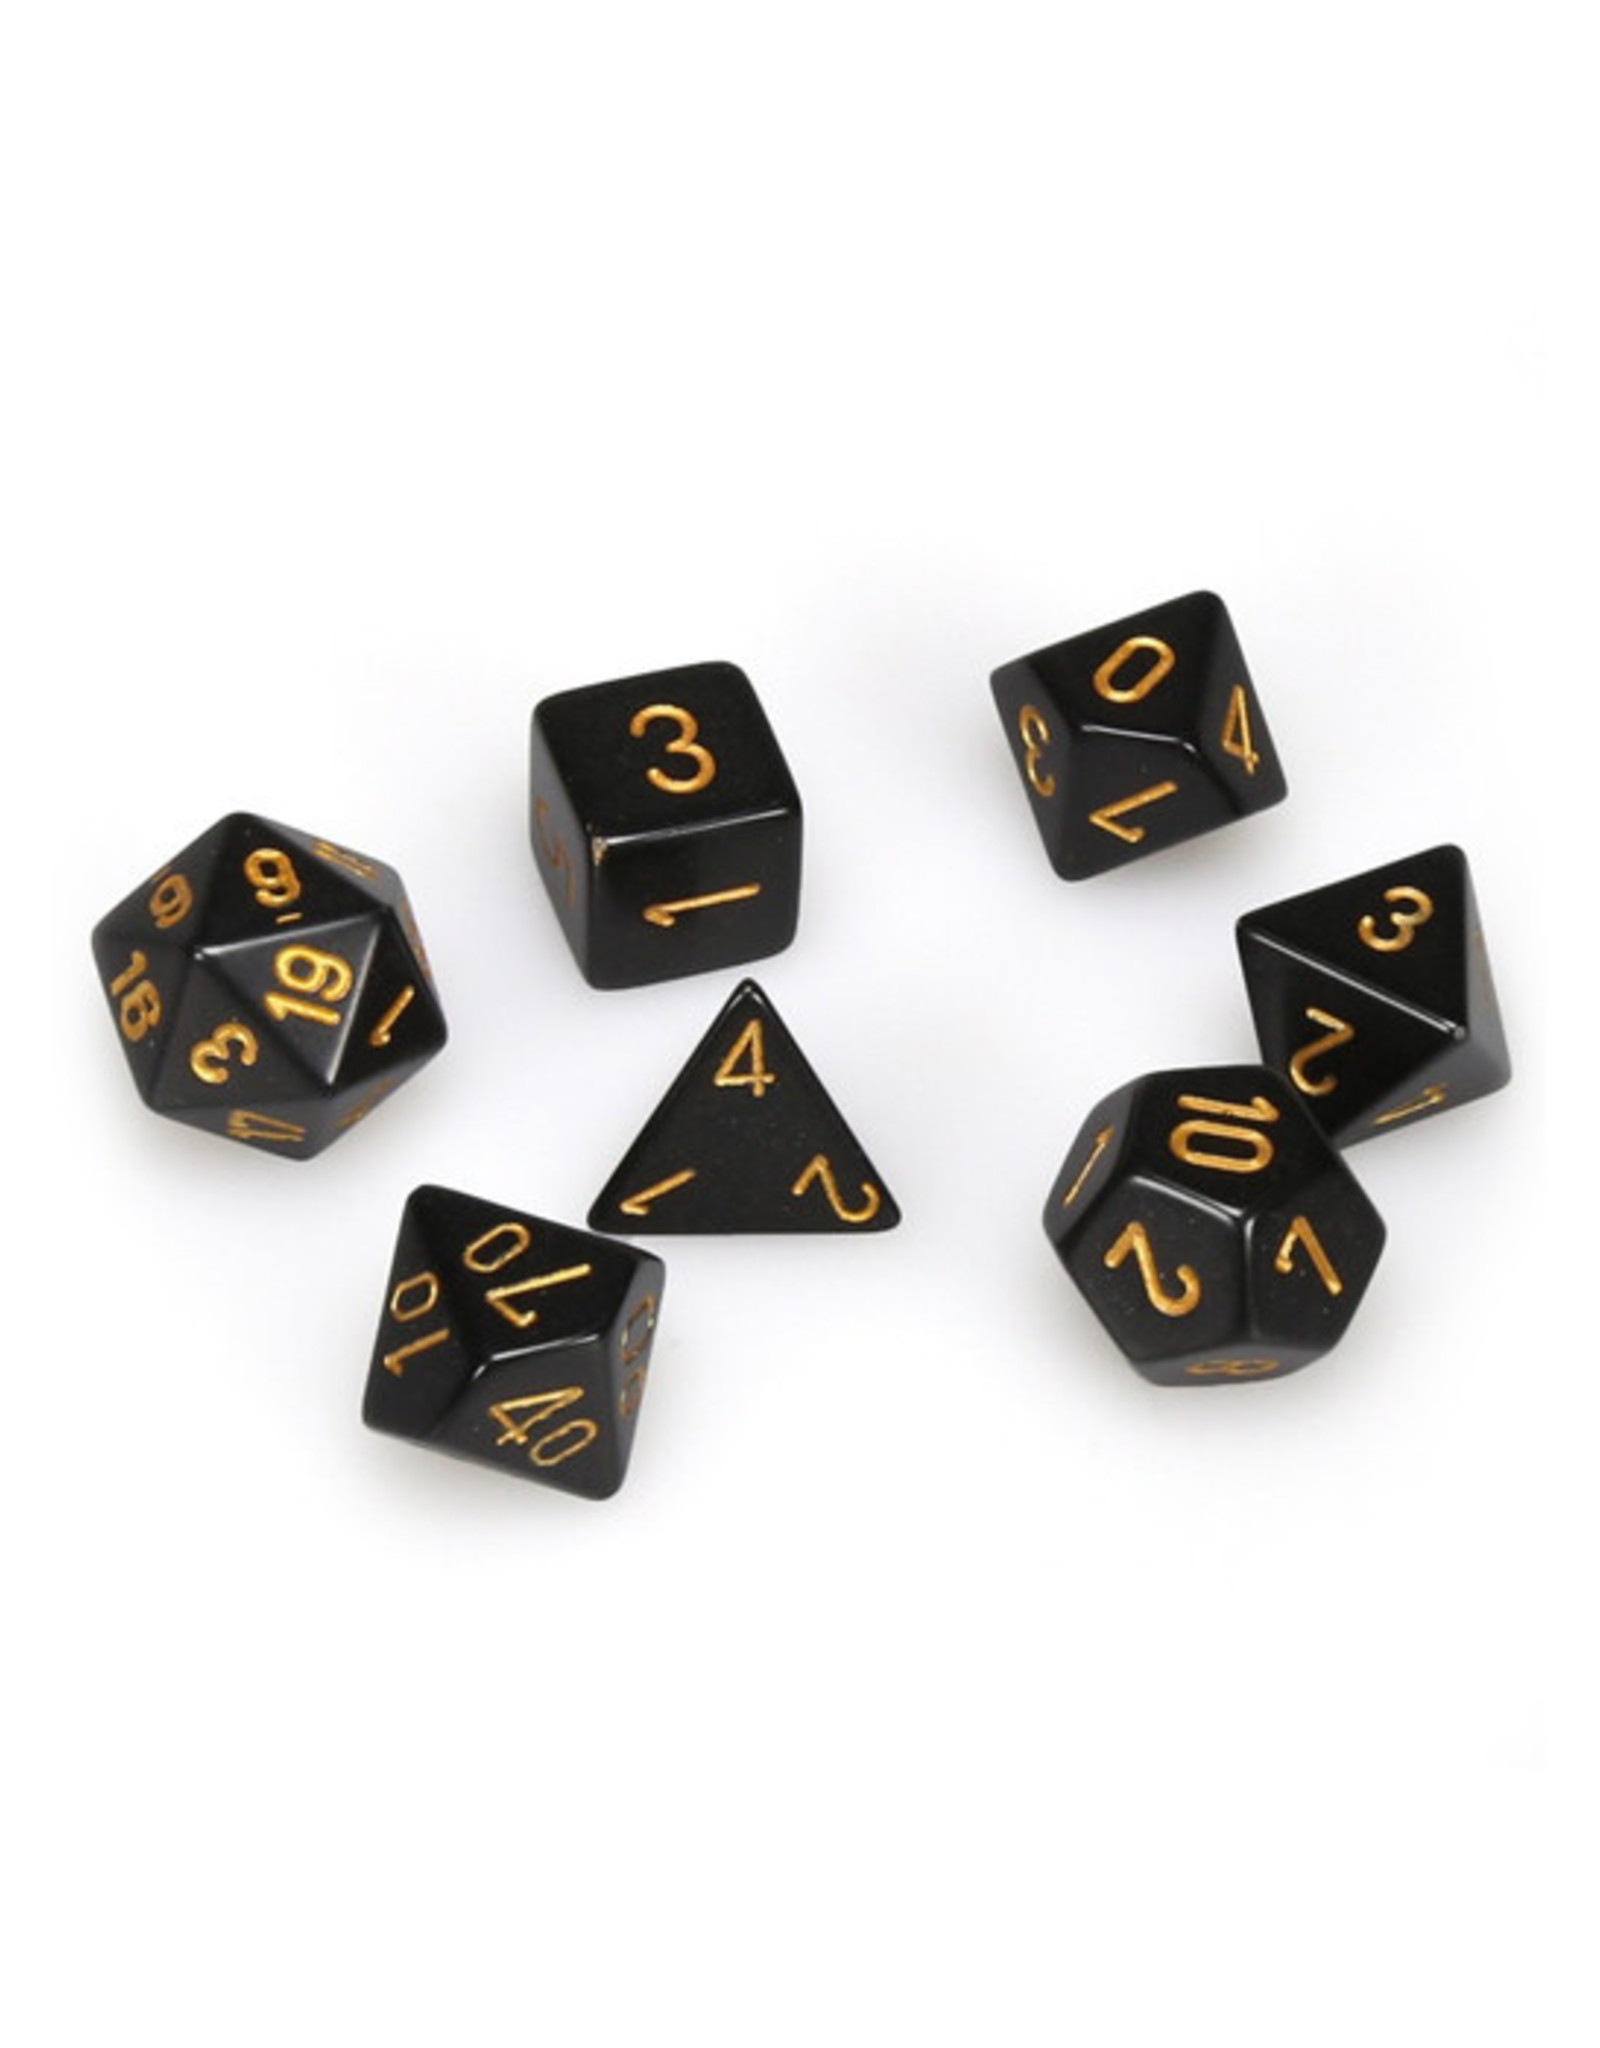 Chessex Chessex: Poly 7 Set - Opaque - Black w/ Gold